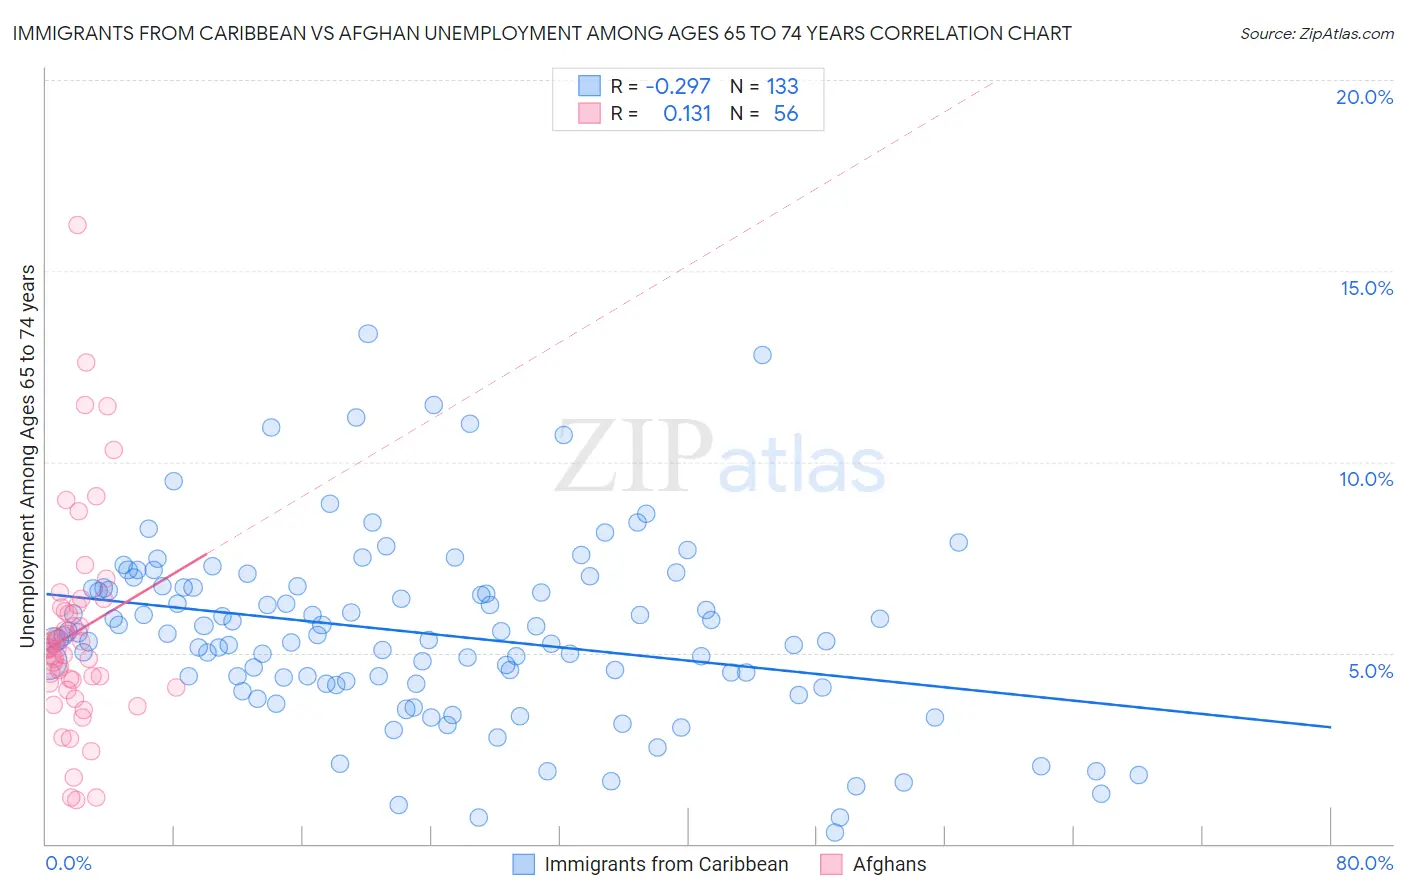 Immigrants from Caribbean vs Afghan Unemployment Among Ages 65 to 74 years